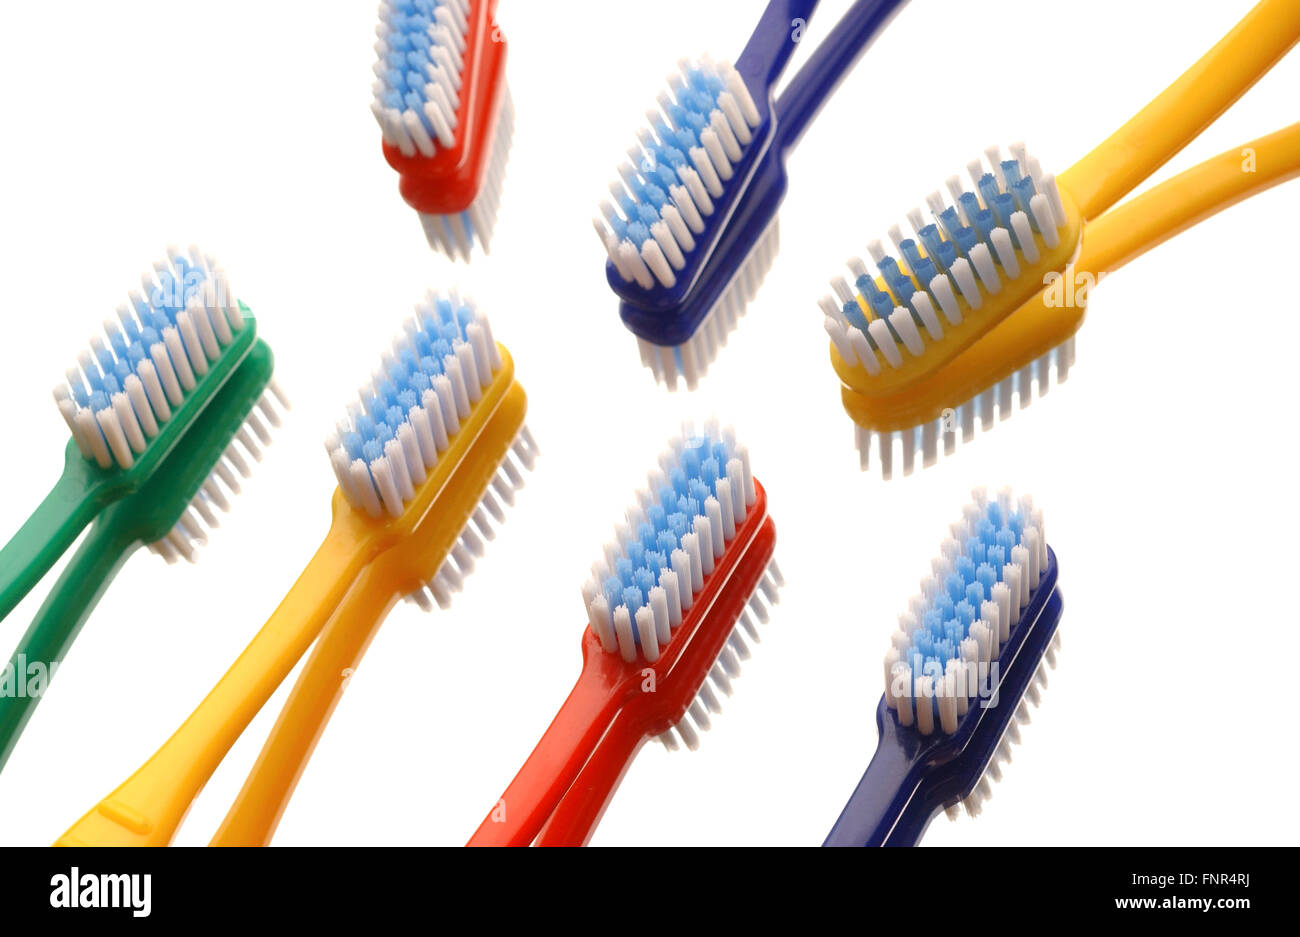 Multi colored toothbrush heads. Stock Photo